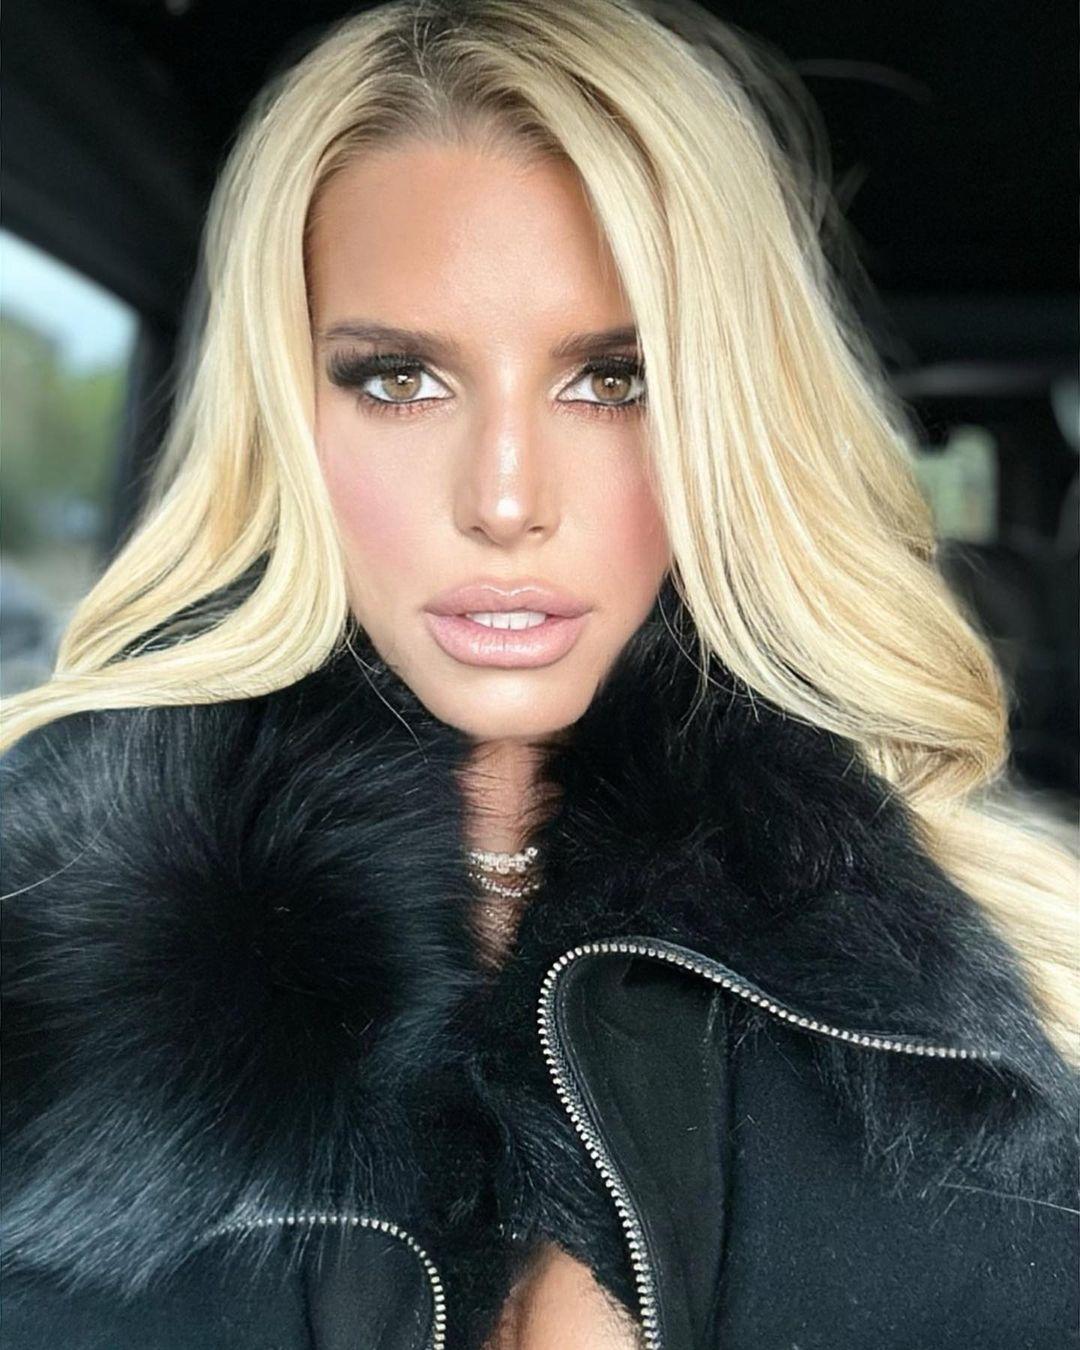 Jessica Simpson slammed for 'heavy filters' in new 'unrecognizable